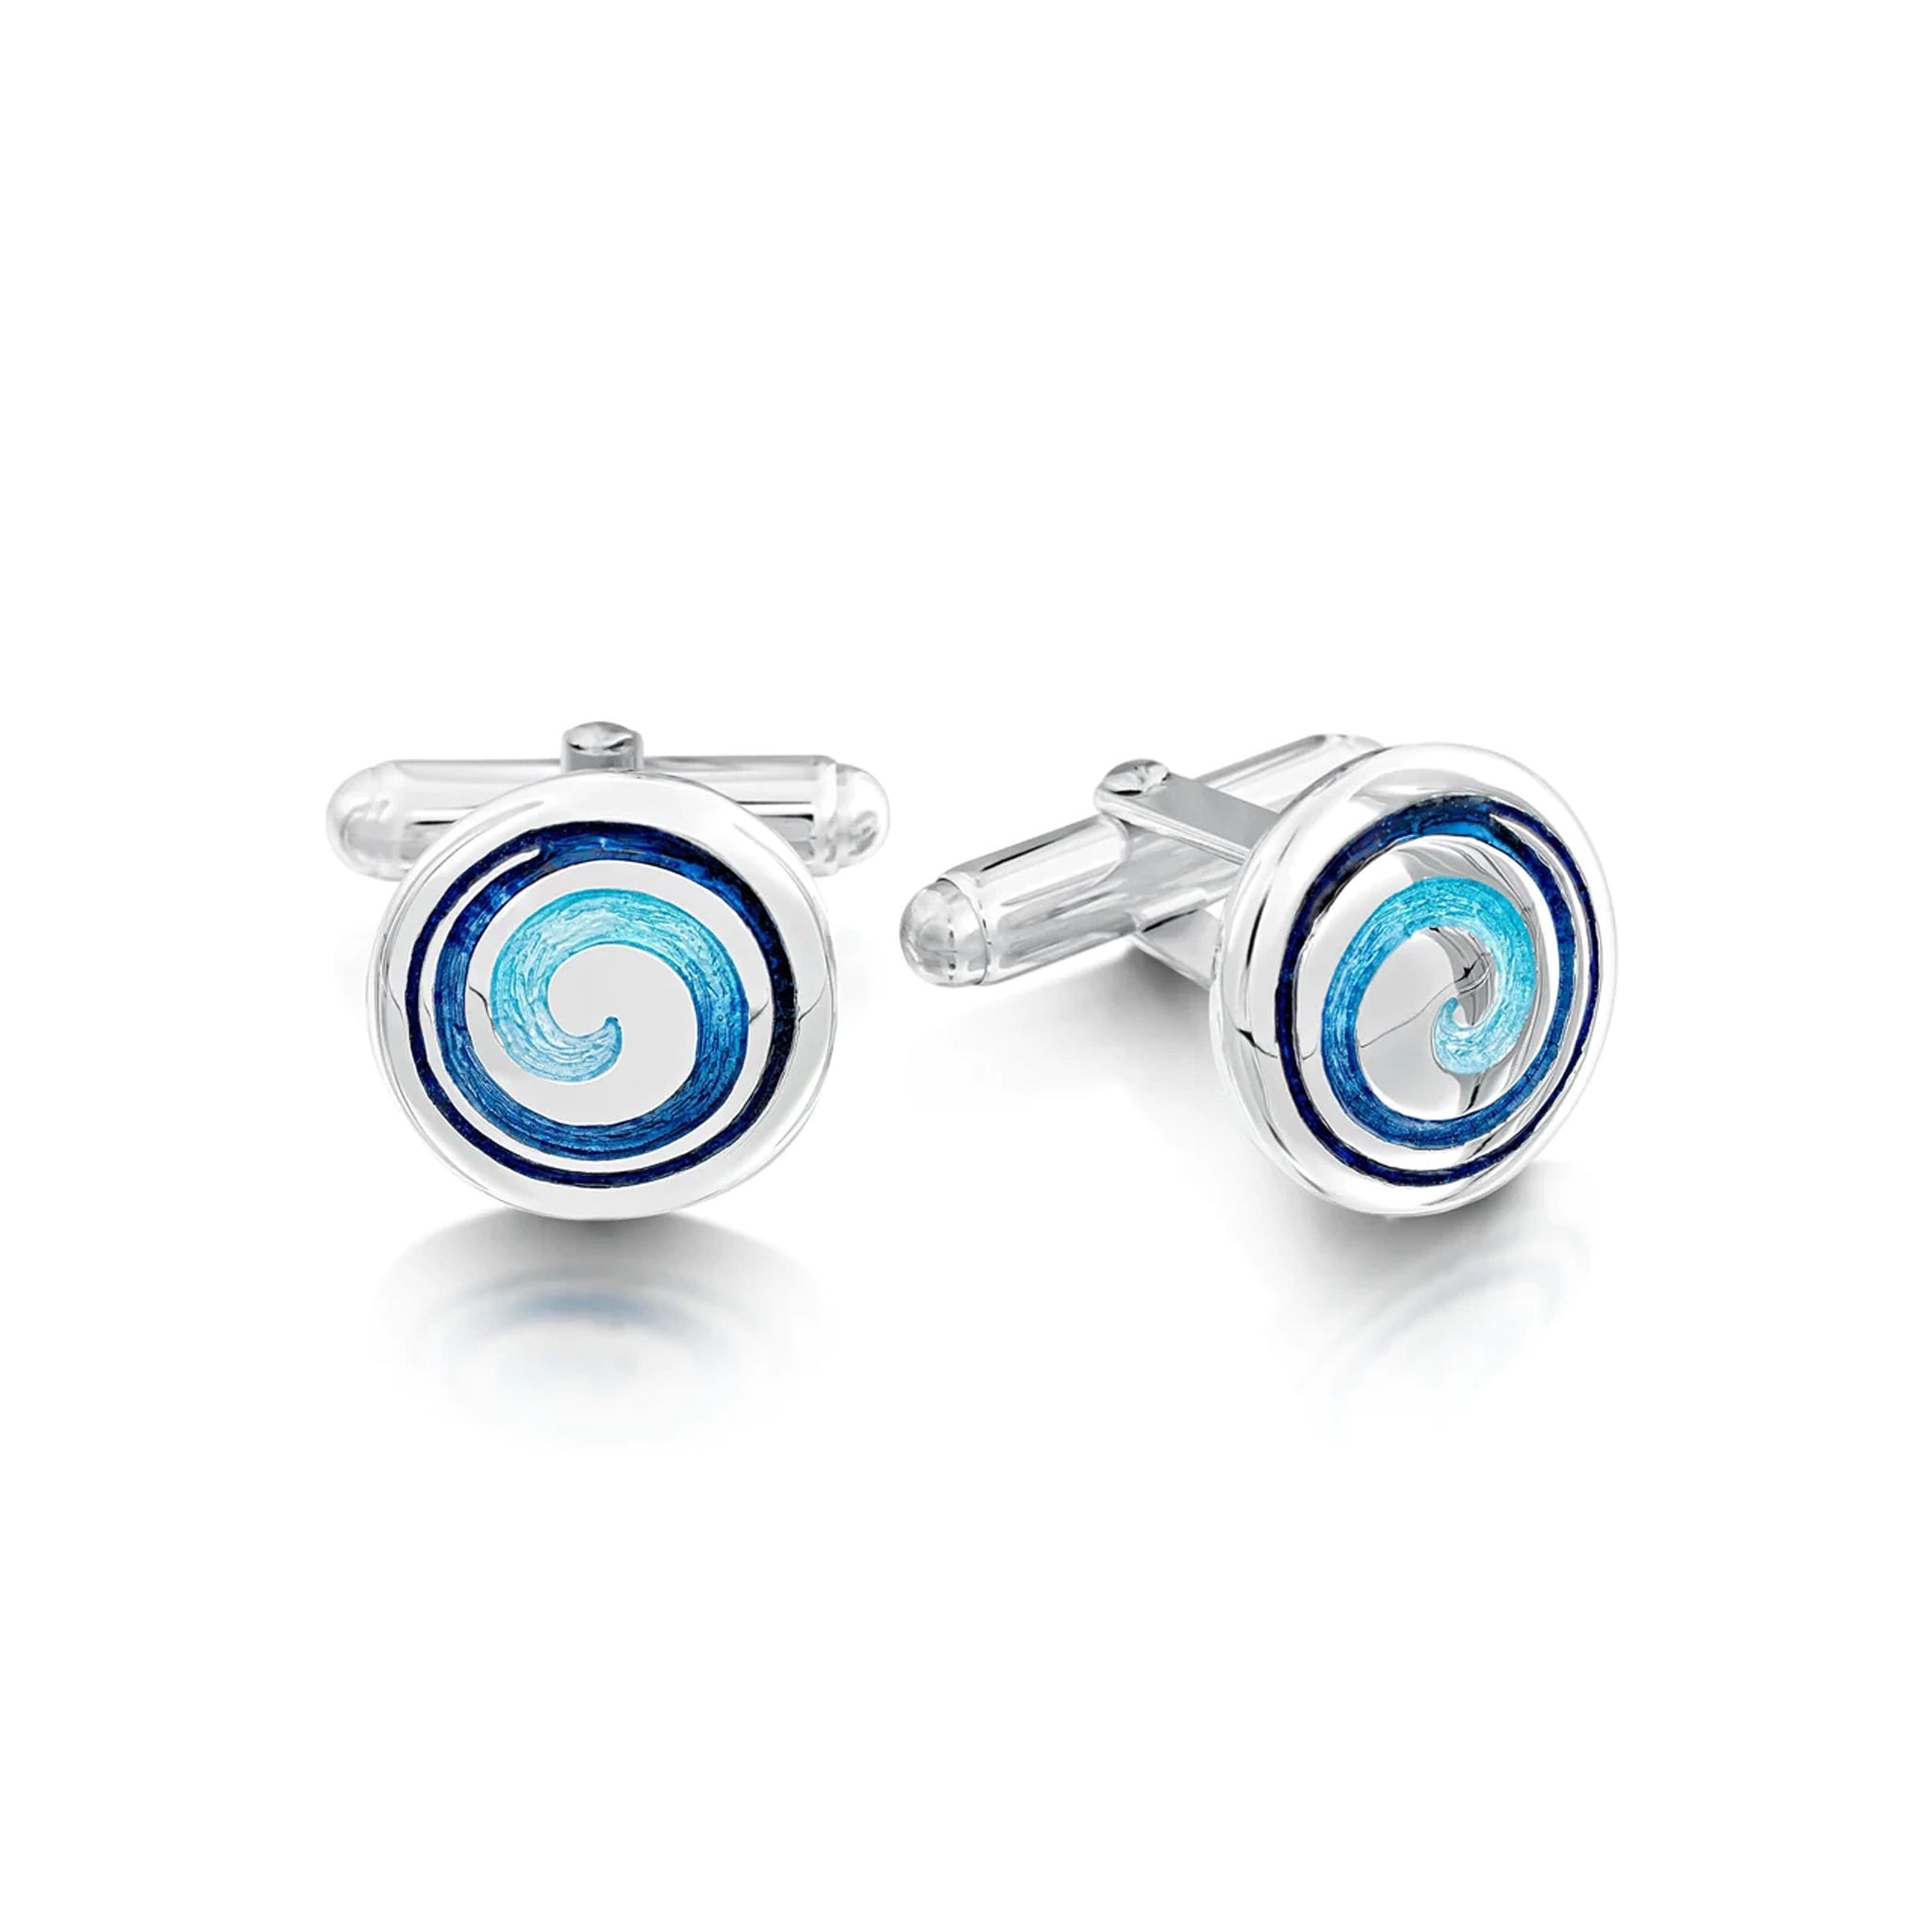 Silver round cufflinks with a gradient blue enamel swirl and a T-bar clasp